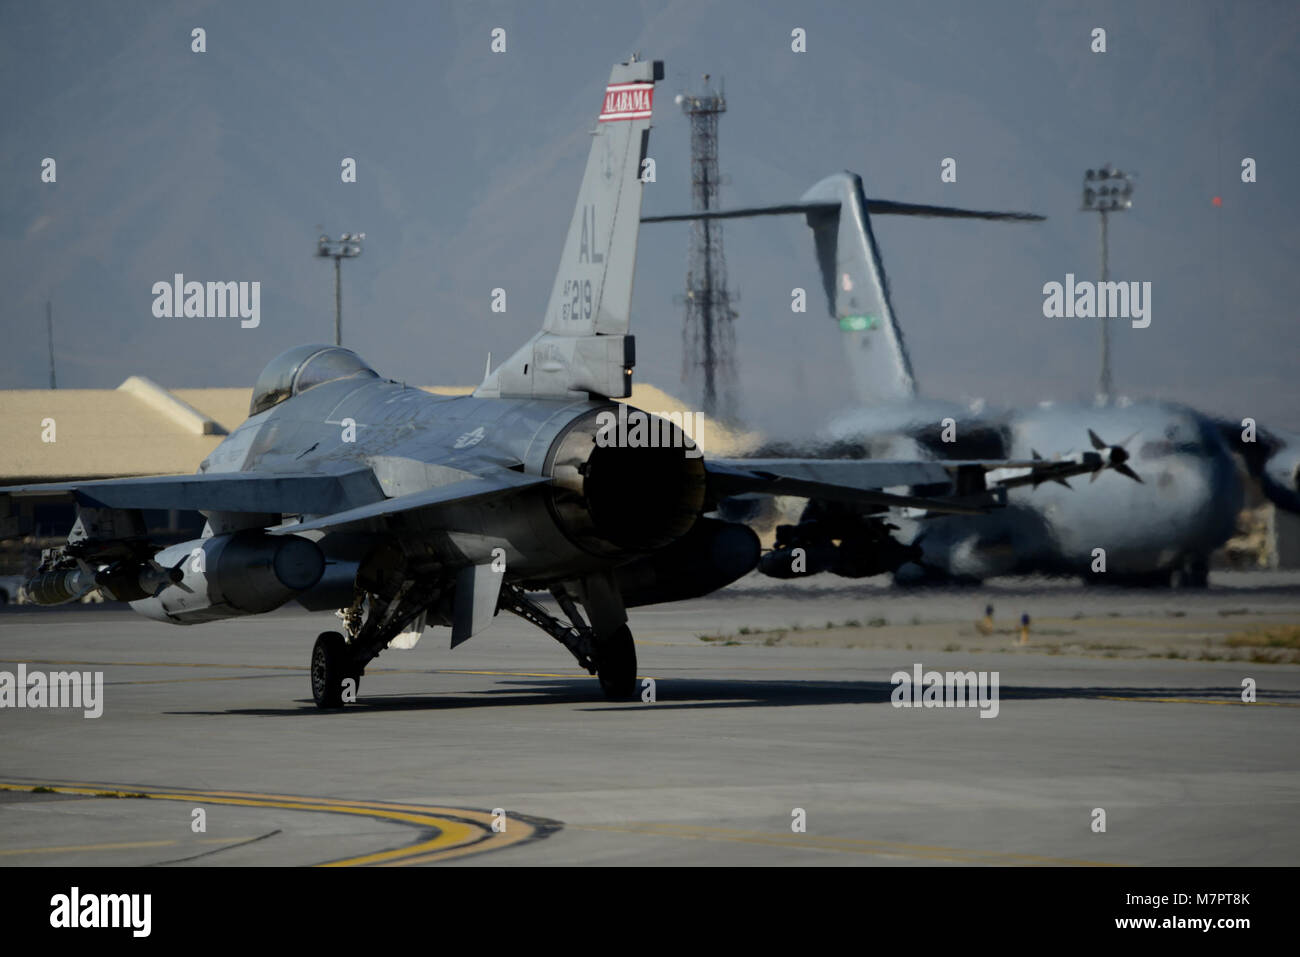 A U.S. Air Force F-16C Fighting Falcon prepares for take off at Bagram Airfield, Afghanistan Oct. 24, 2014.  Deployed service members help operate 46 different types of aircraft in-and-out of the buisiest single runway airfield in the Department of Defense. (U.S. Air Force photo by Staff Sgt. Evelyn Chavez/Released) 455th Air Expeditionary Wing Bagram Airfield, Afghanistan Stock Photo